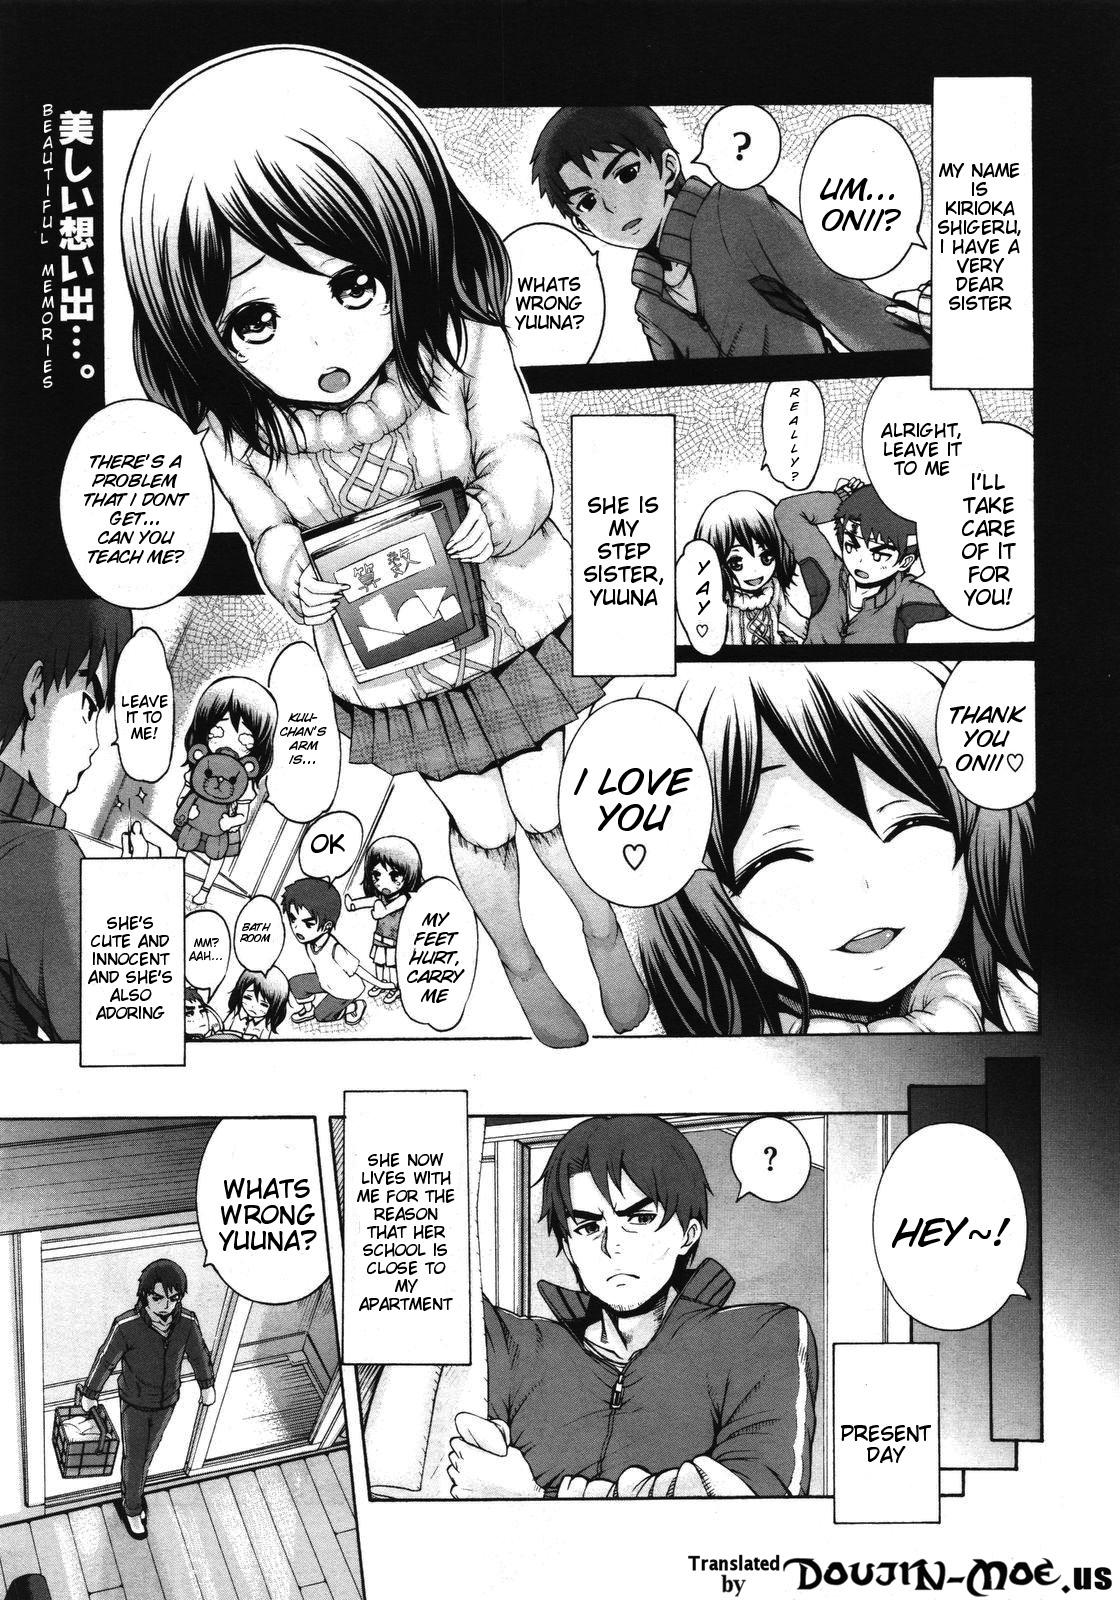 Hot Women Fucking Konna Ani no Imouto Dakara | Animoca - It's Because I'm a Sister to Such a Brother Gay Shop - Page 1